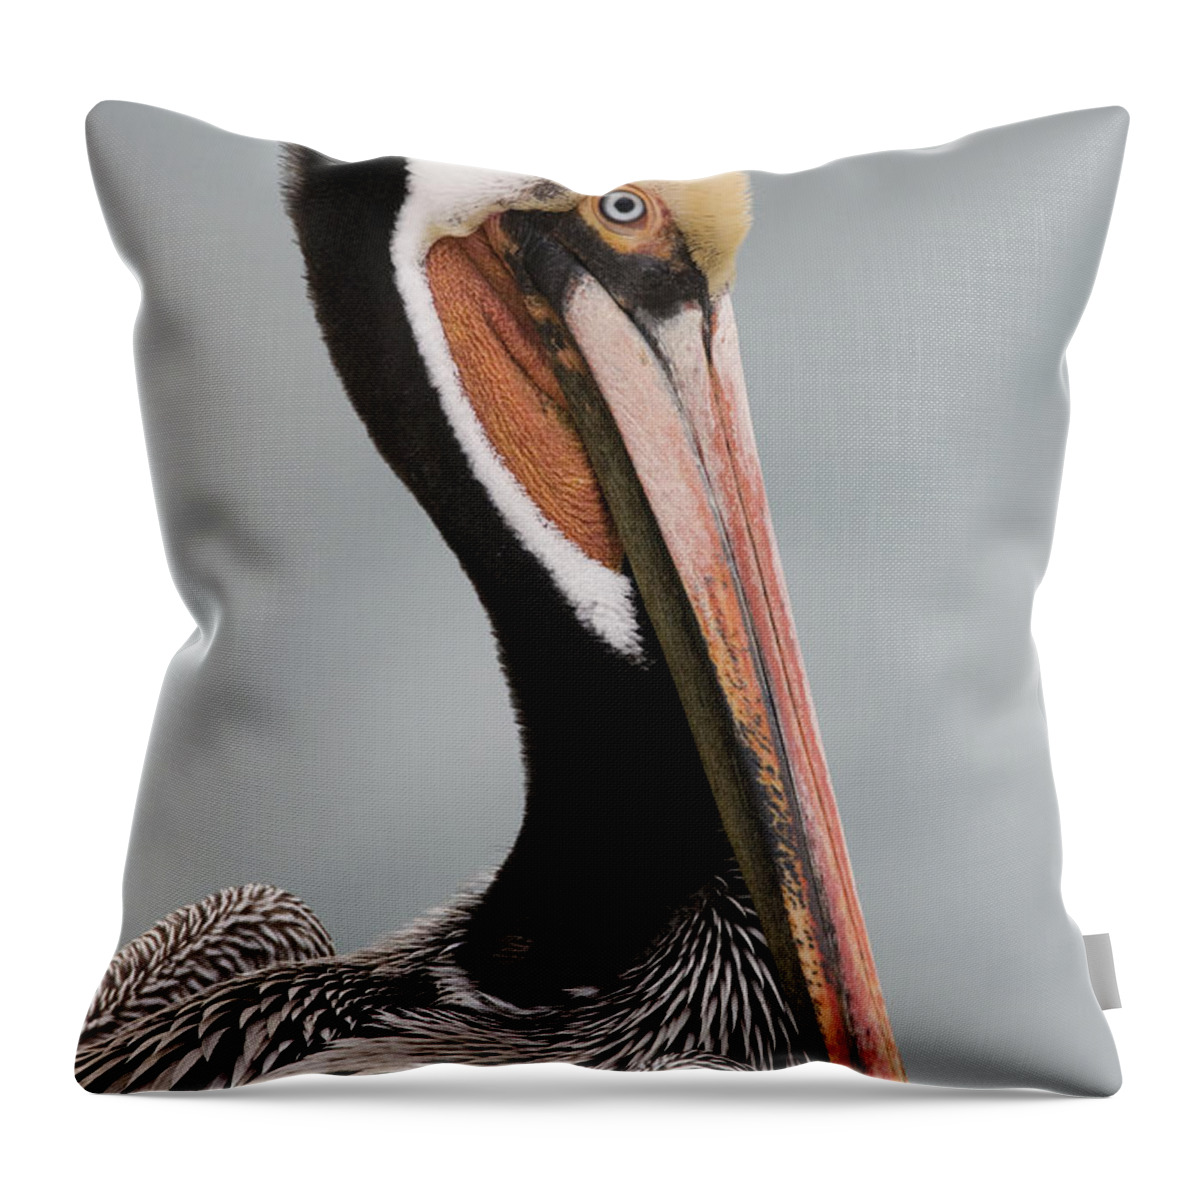 00429836 Throw Pillow featuring the photograph Brown Pelican In Breeding Plumage La #2 by Sebastian Kennerknecht